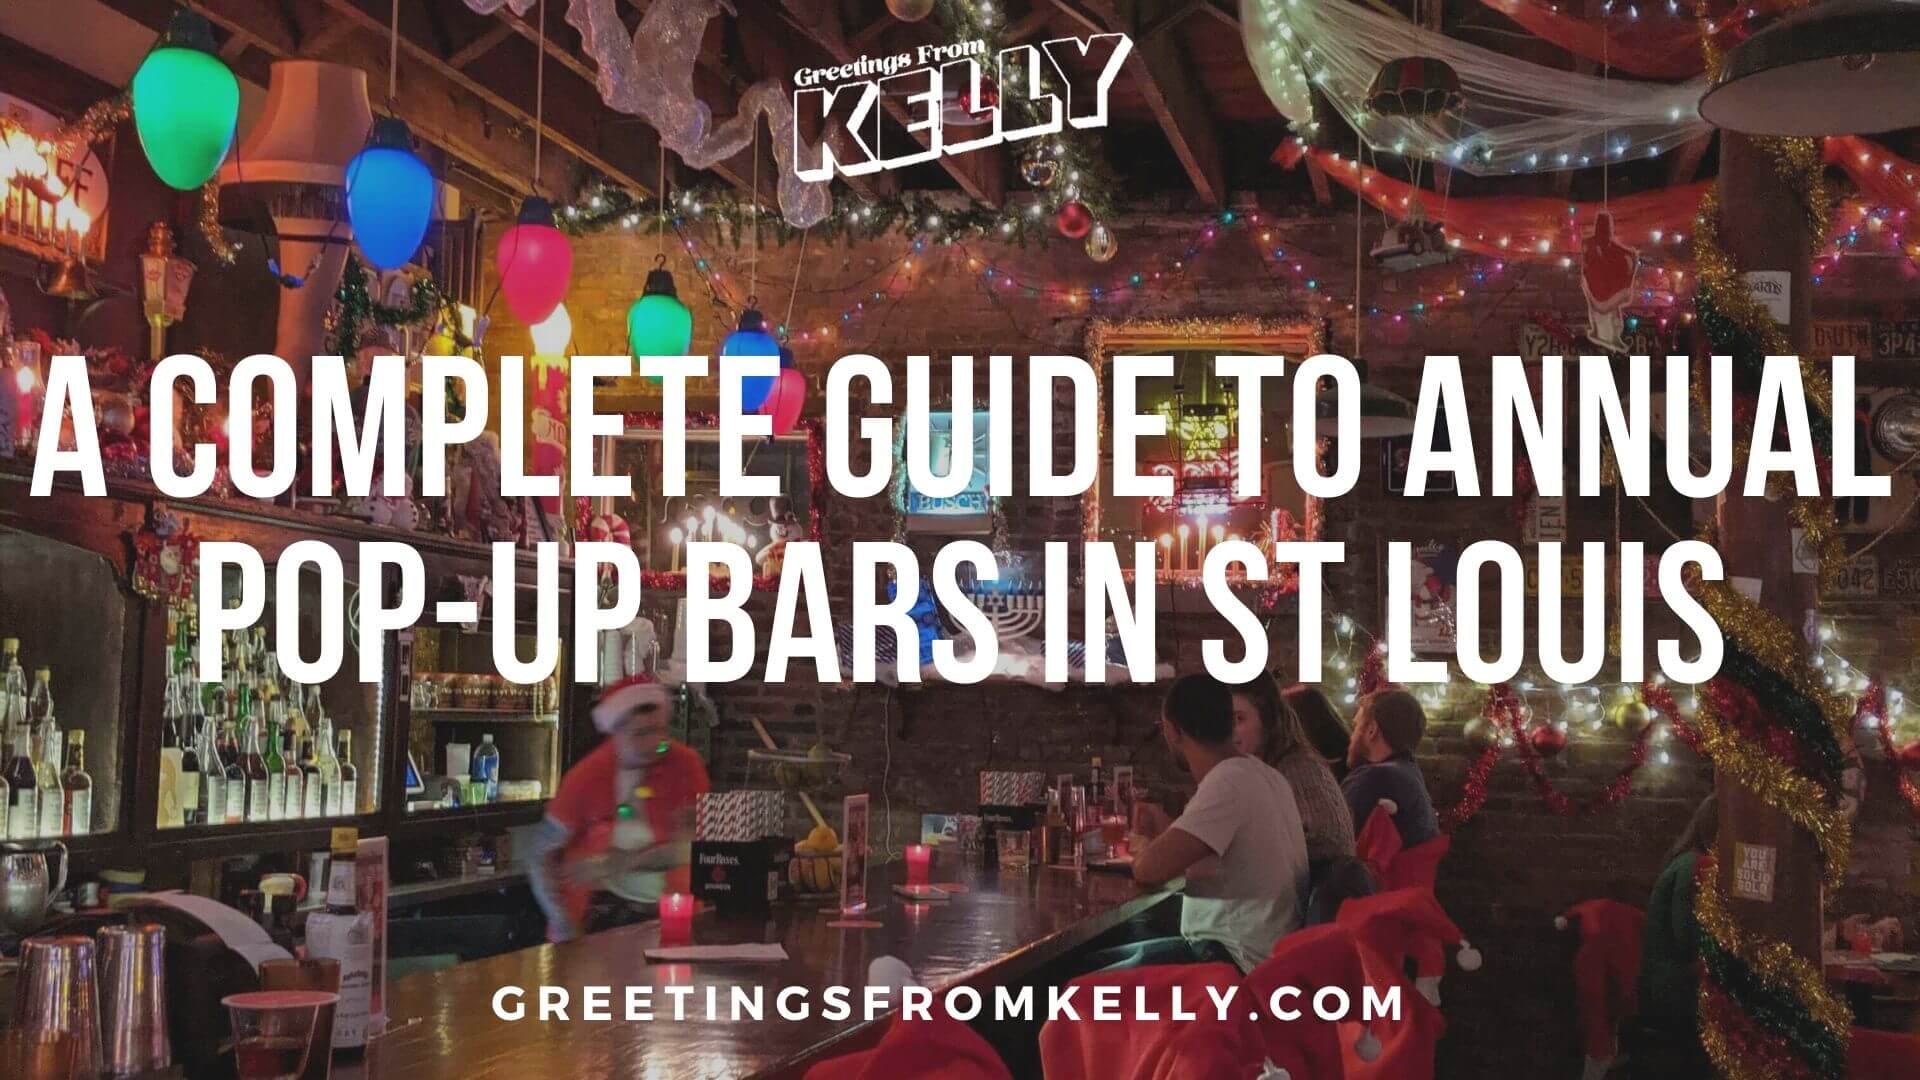 A Complete Guide to Annual PopUp Bars in St Louis